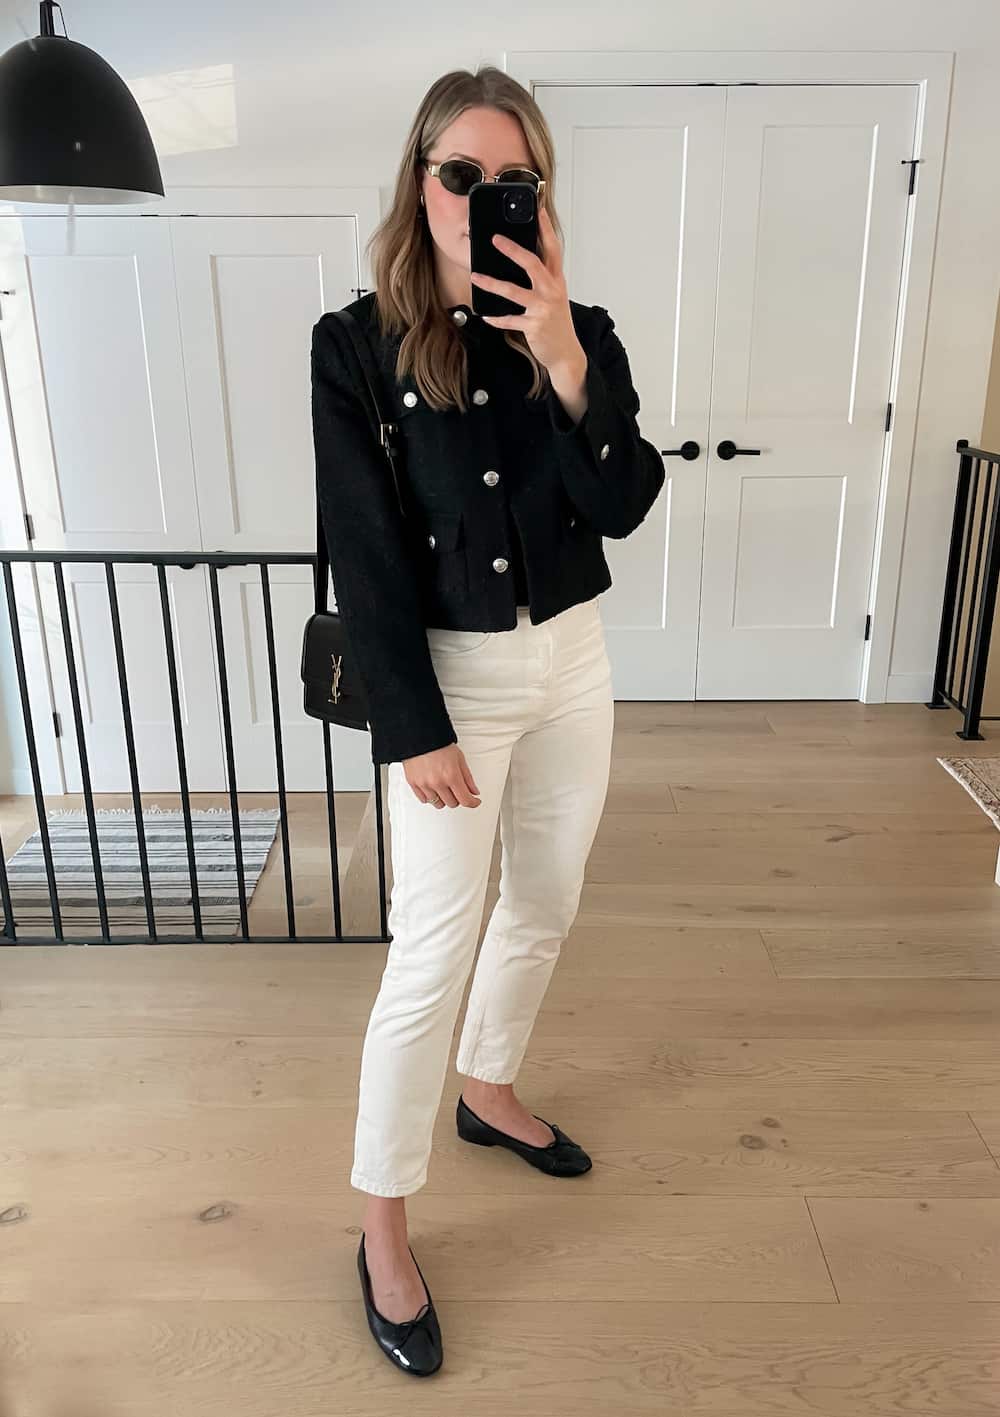 woman wearing a spring capsule wardrobe outfit with an black tweed lady jacket, black top, off-white jeans, and black ballet flats